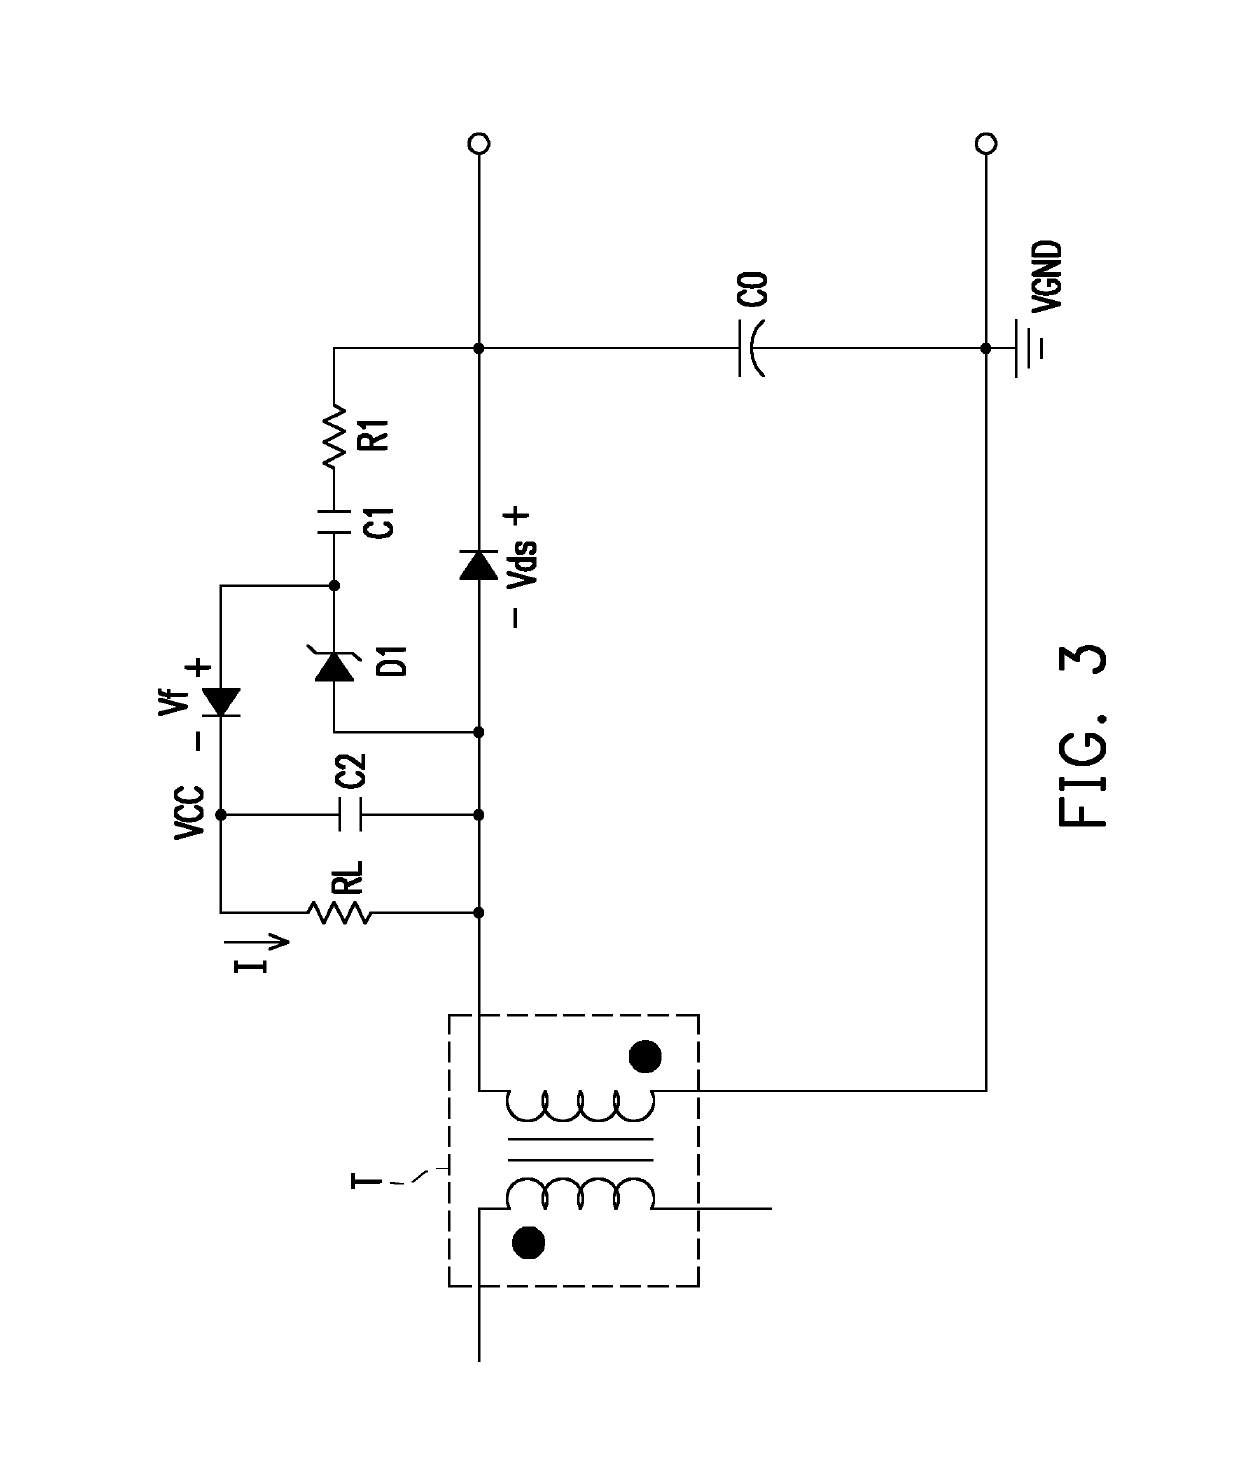 Power conversion apparatus with low power consumption and low cost